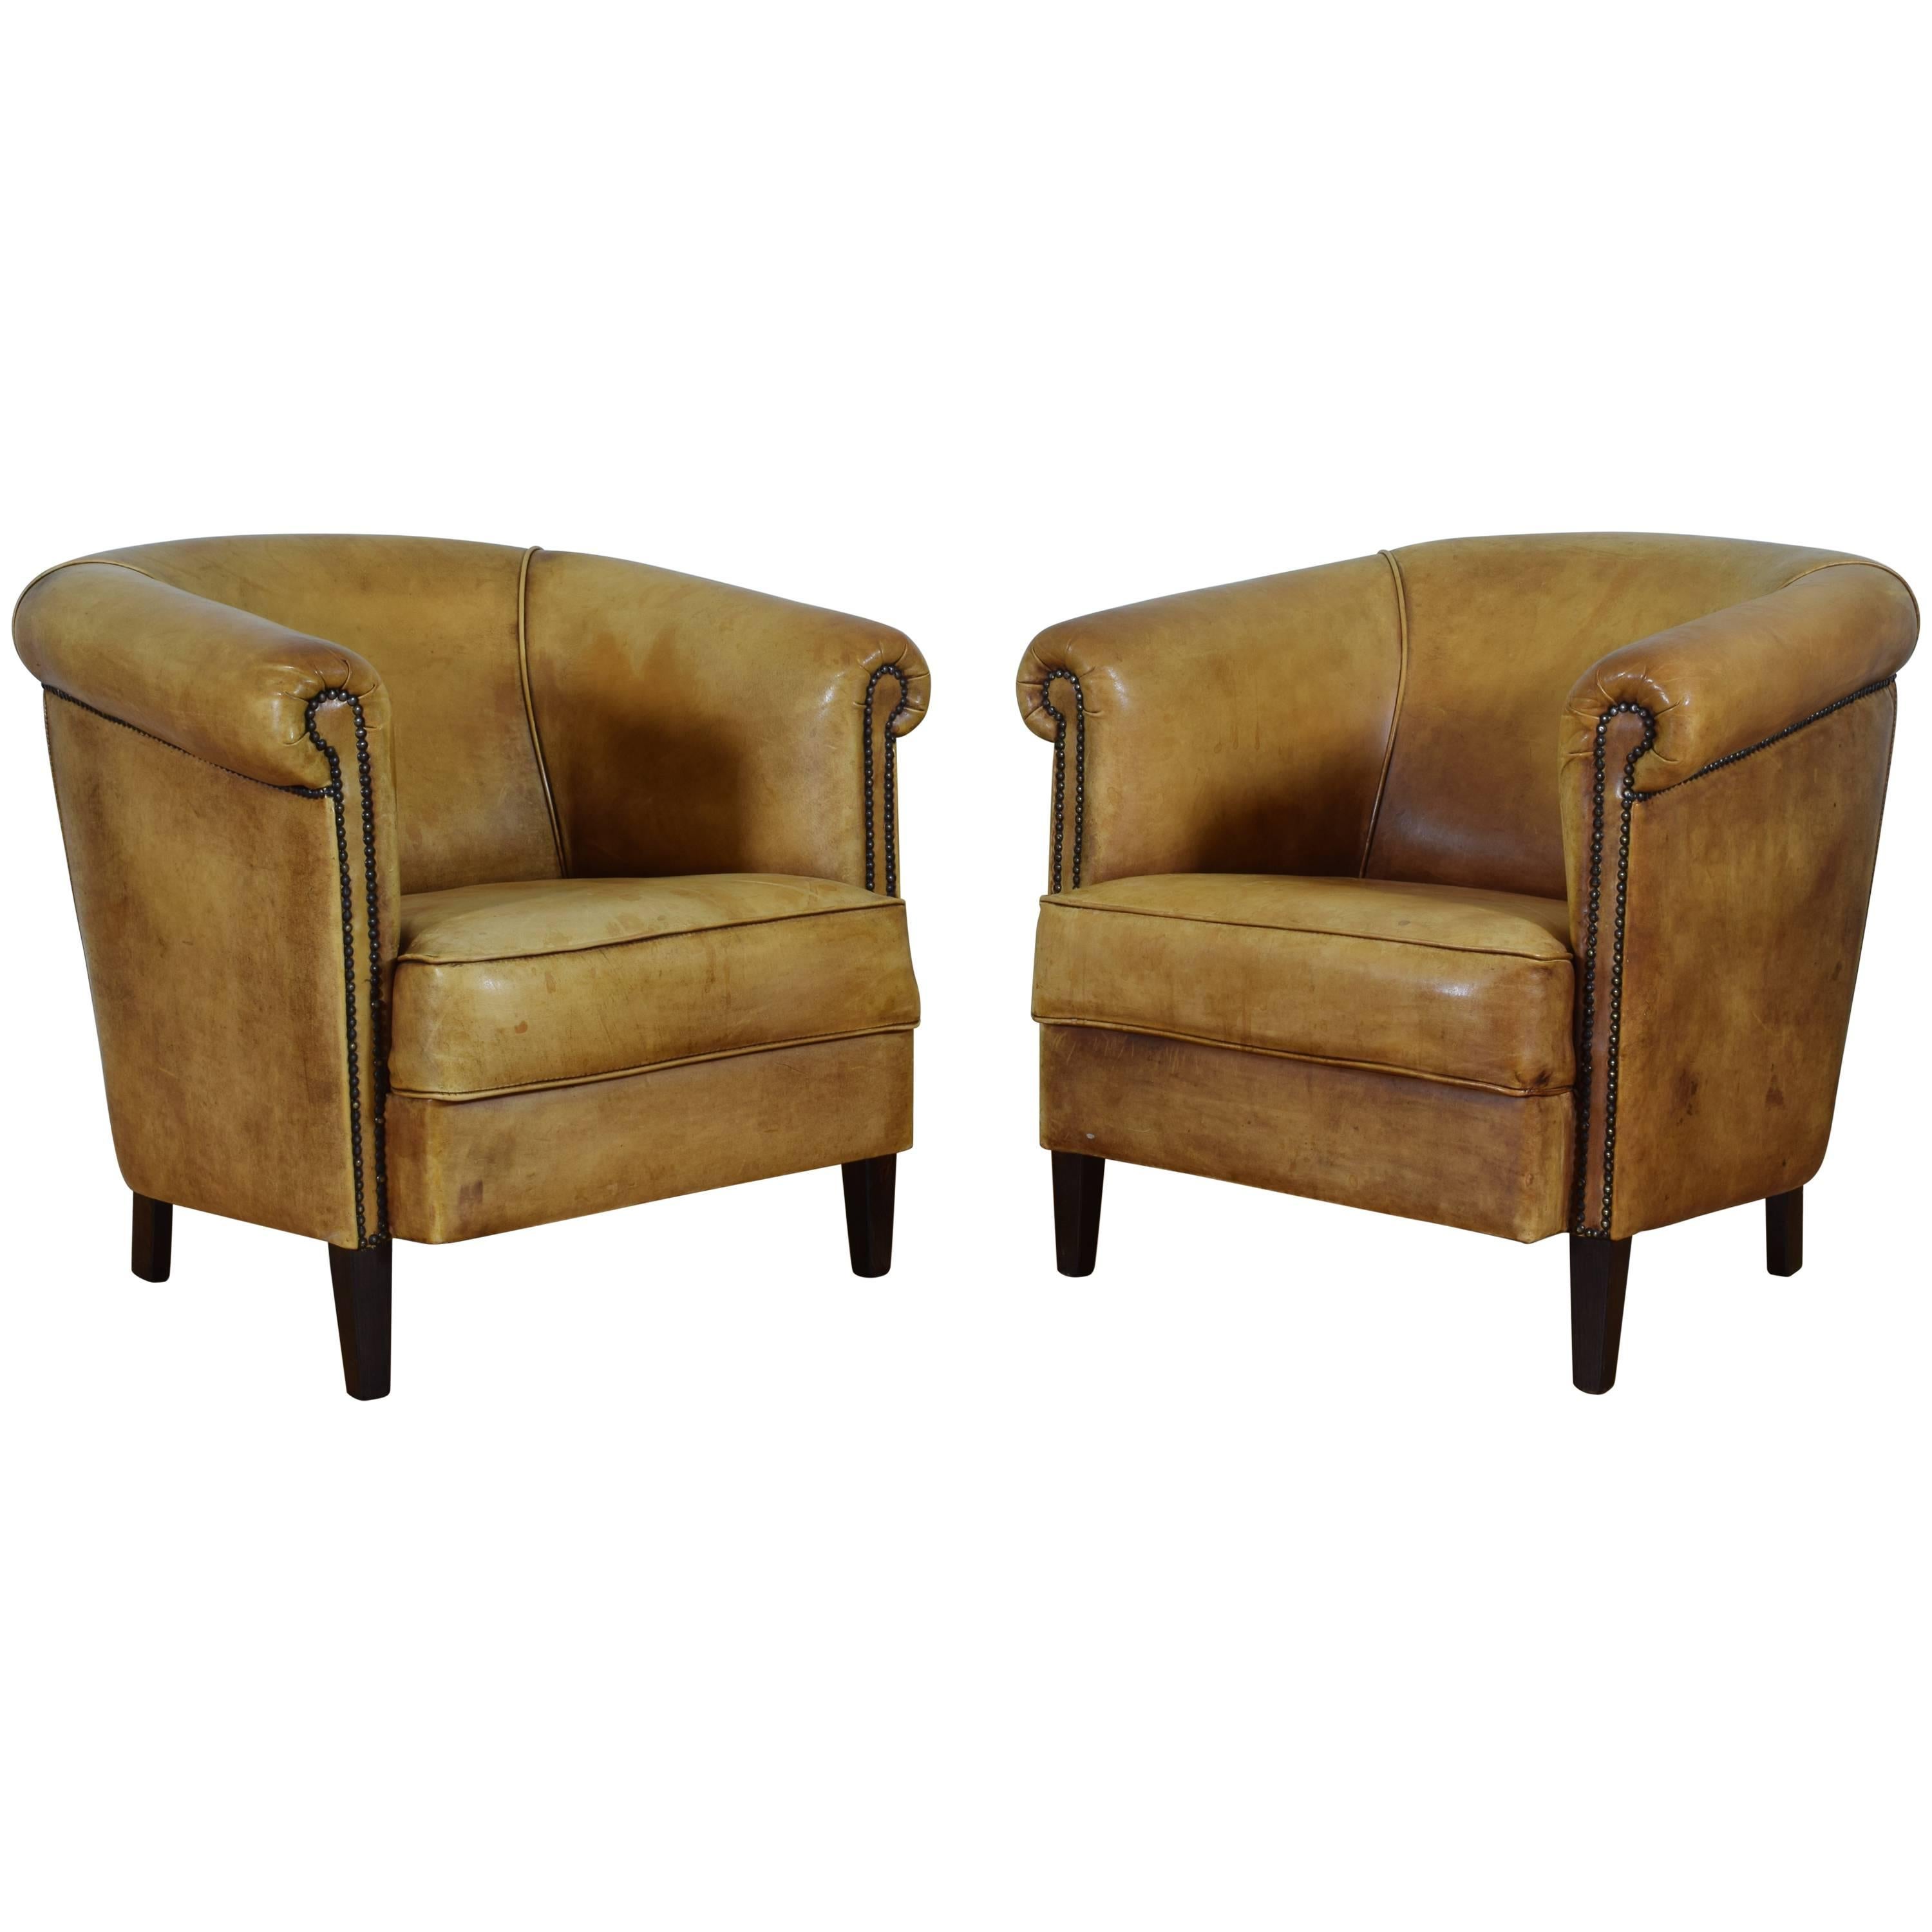 Pair of English Light Tan Leather Club Chairs, Mid-20th Century